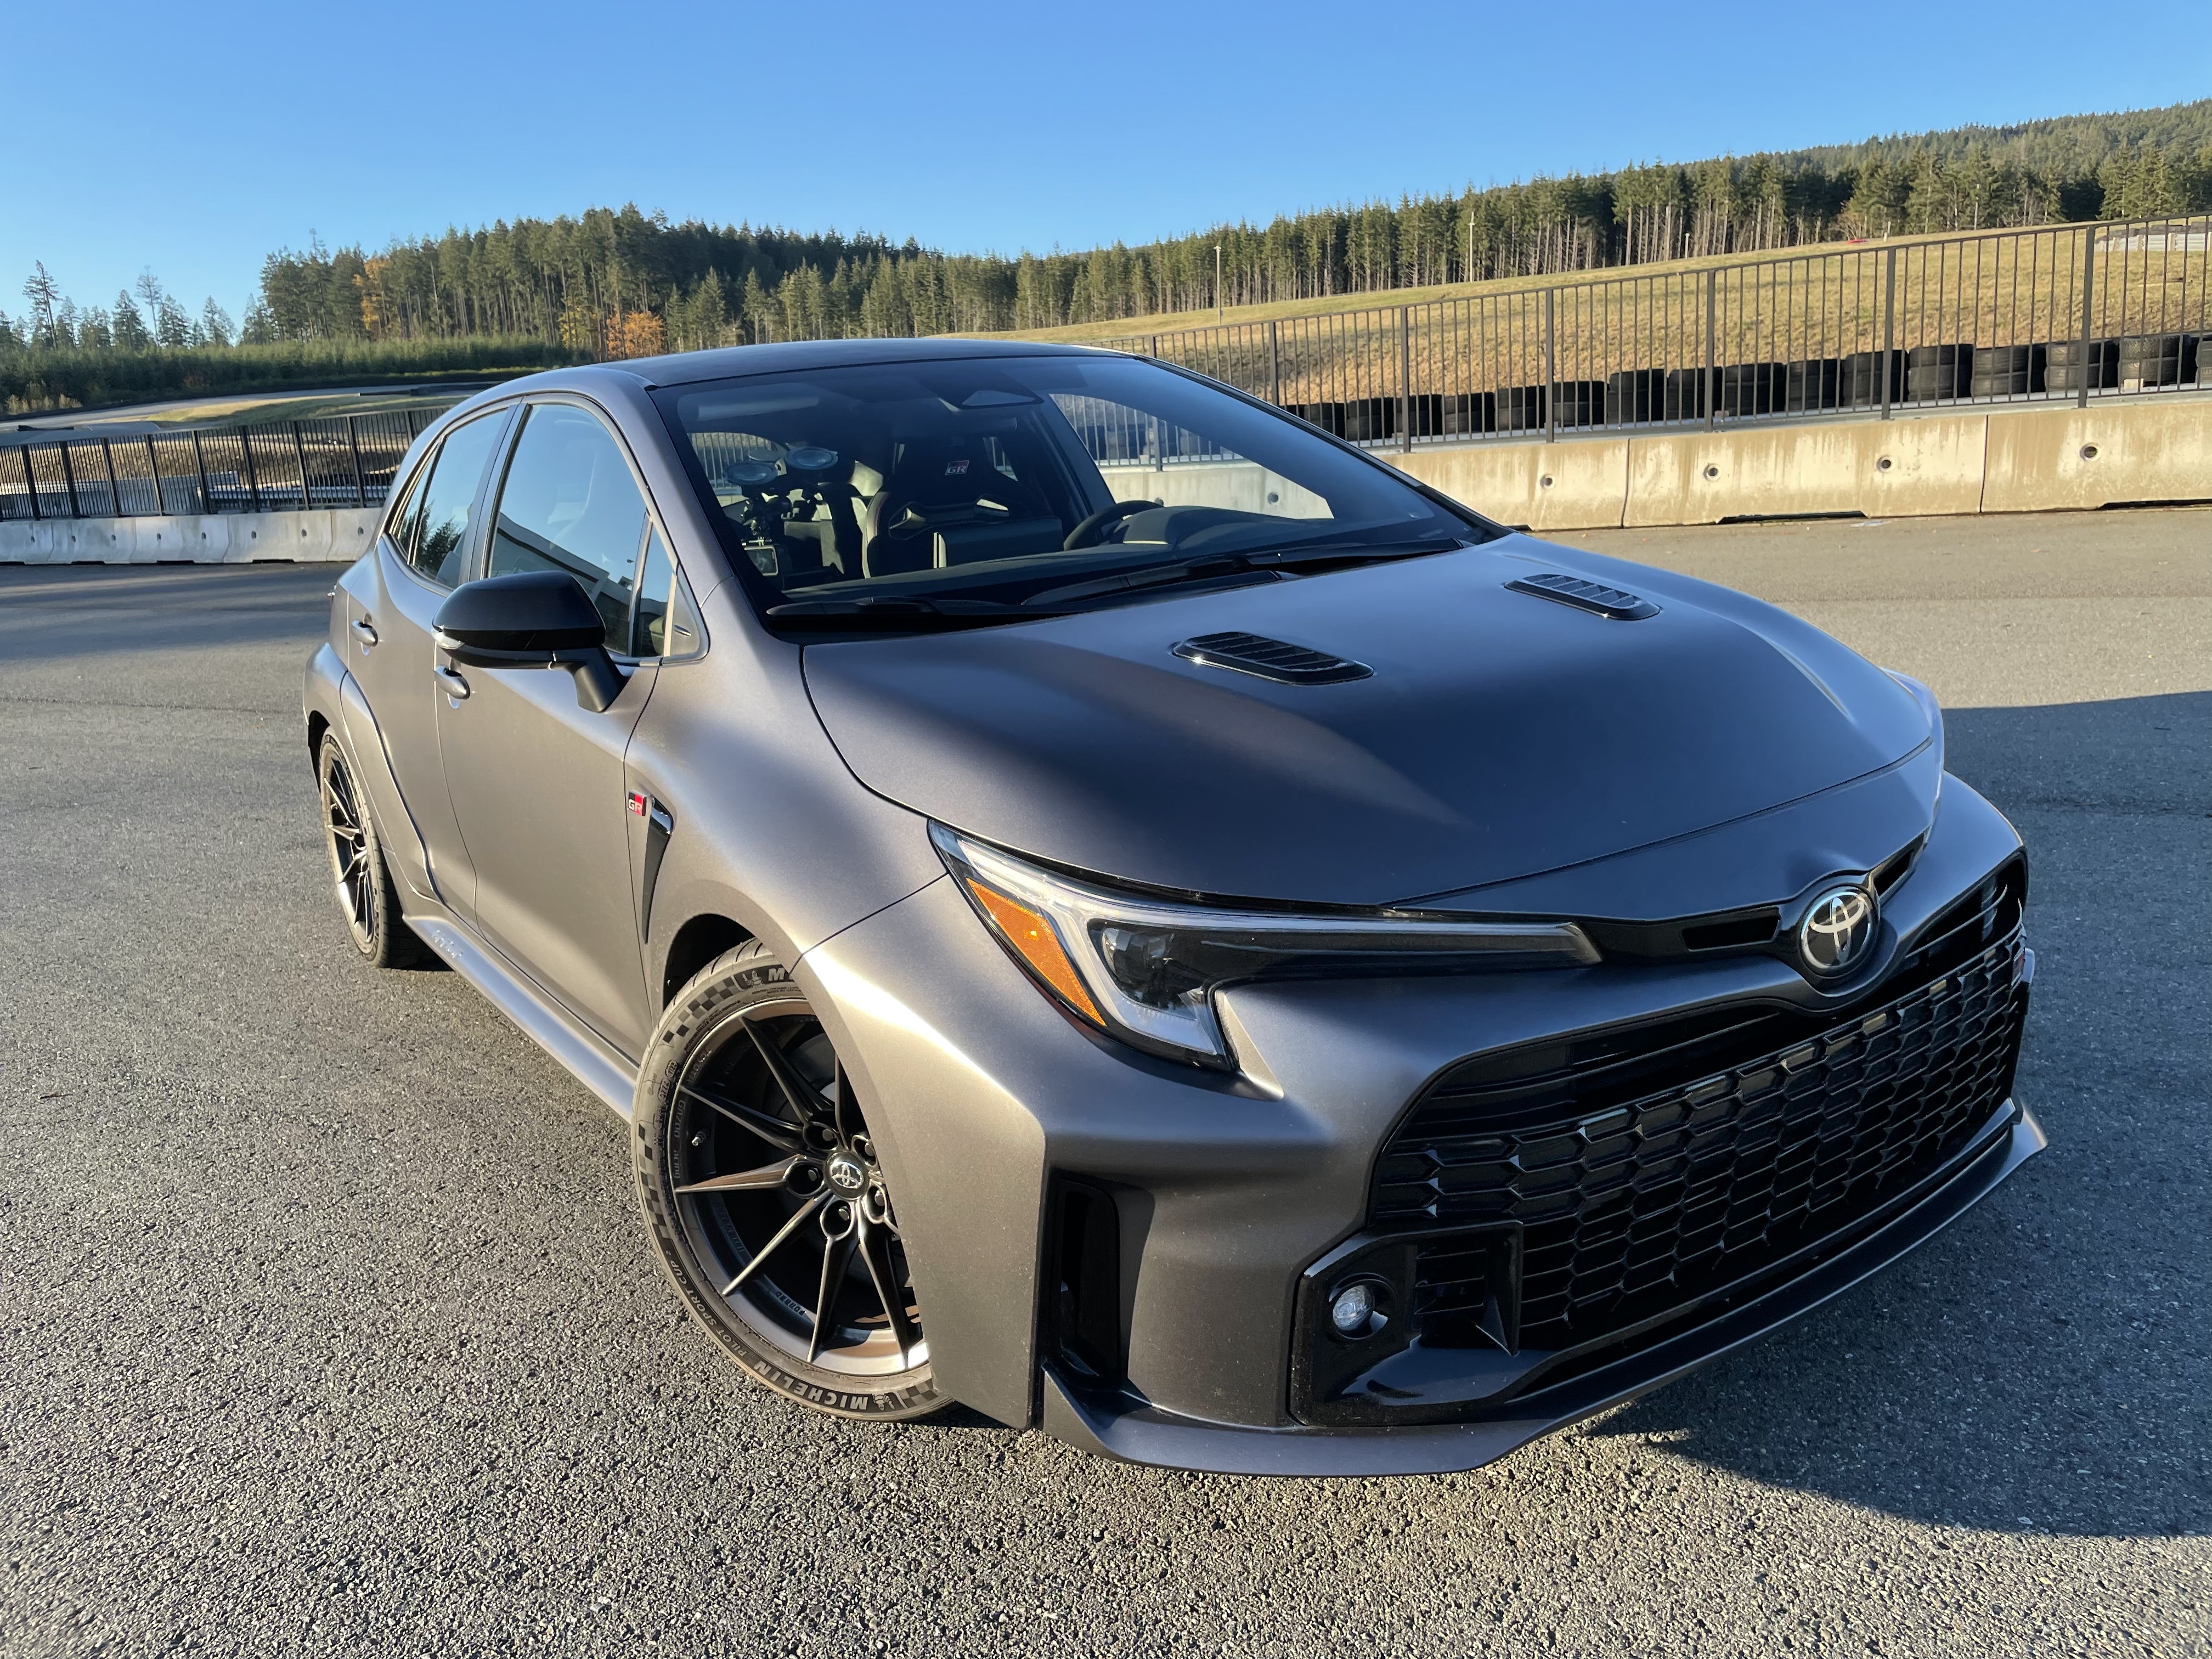 The Toyota GR Corolla is a high-performance hatchback